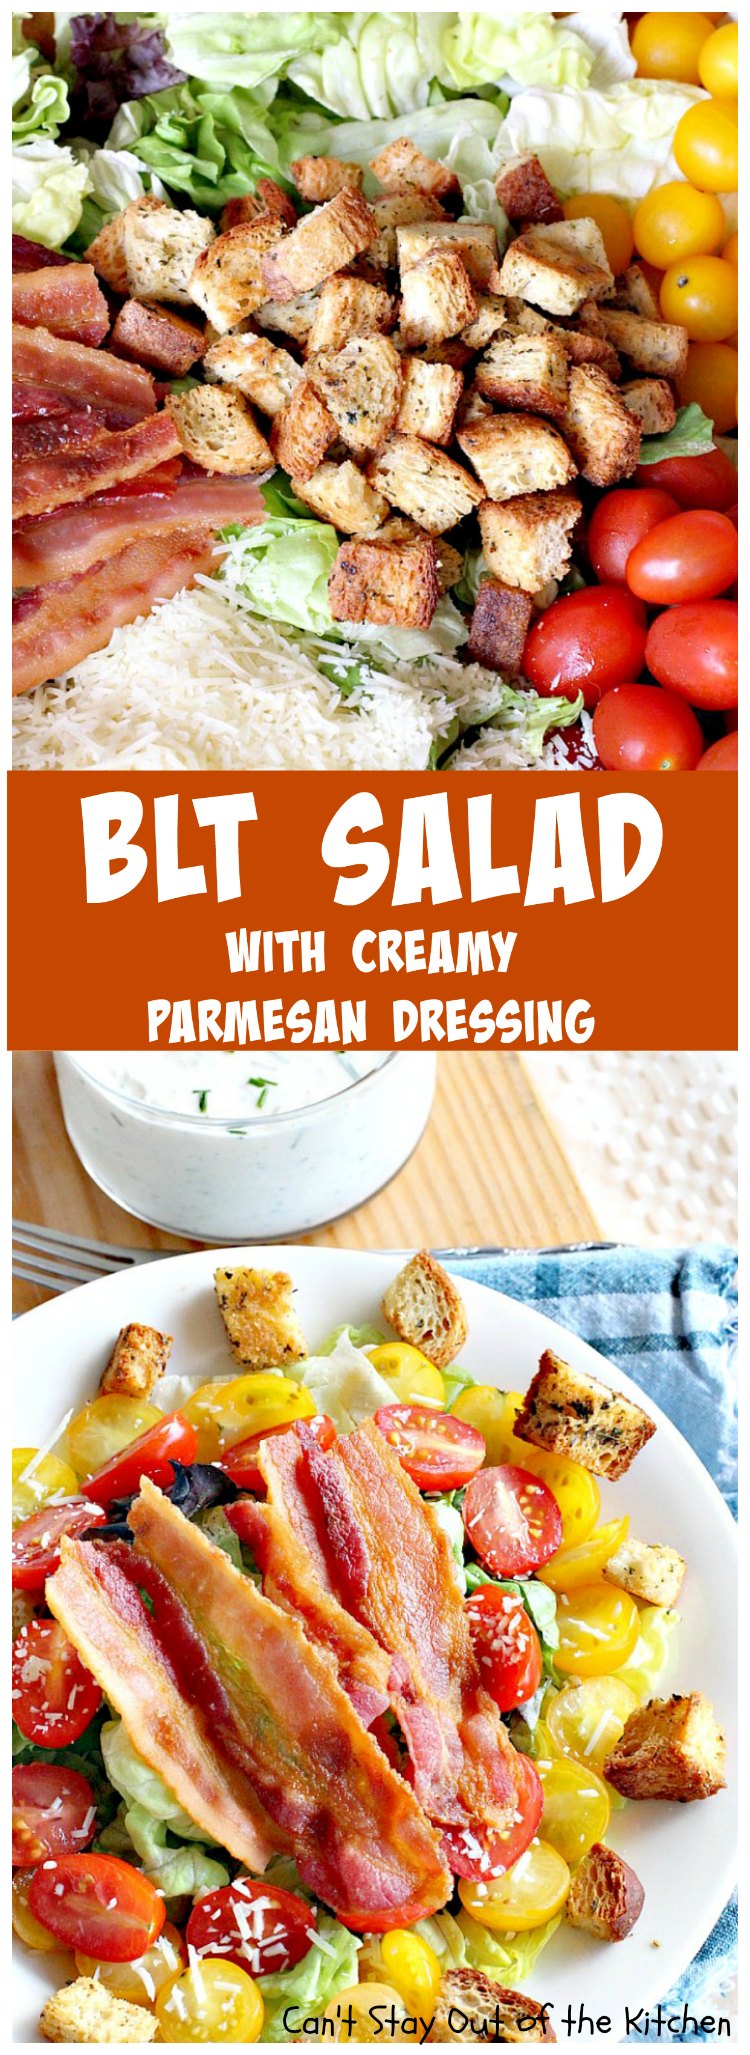 BLT Salad | Can't Stay Out of the Kitchen